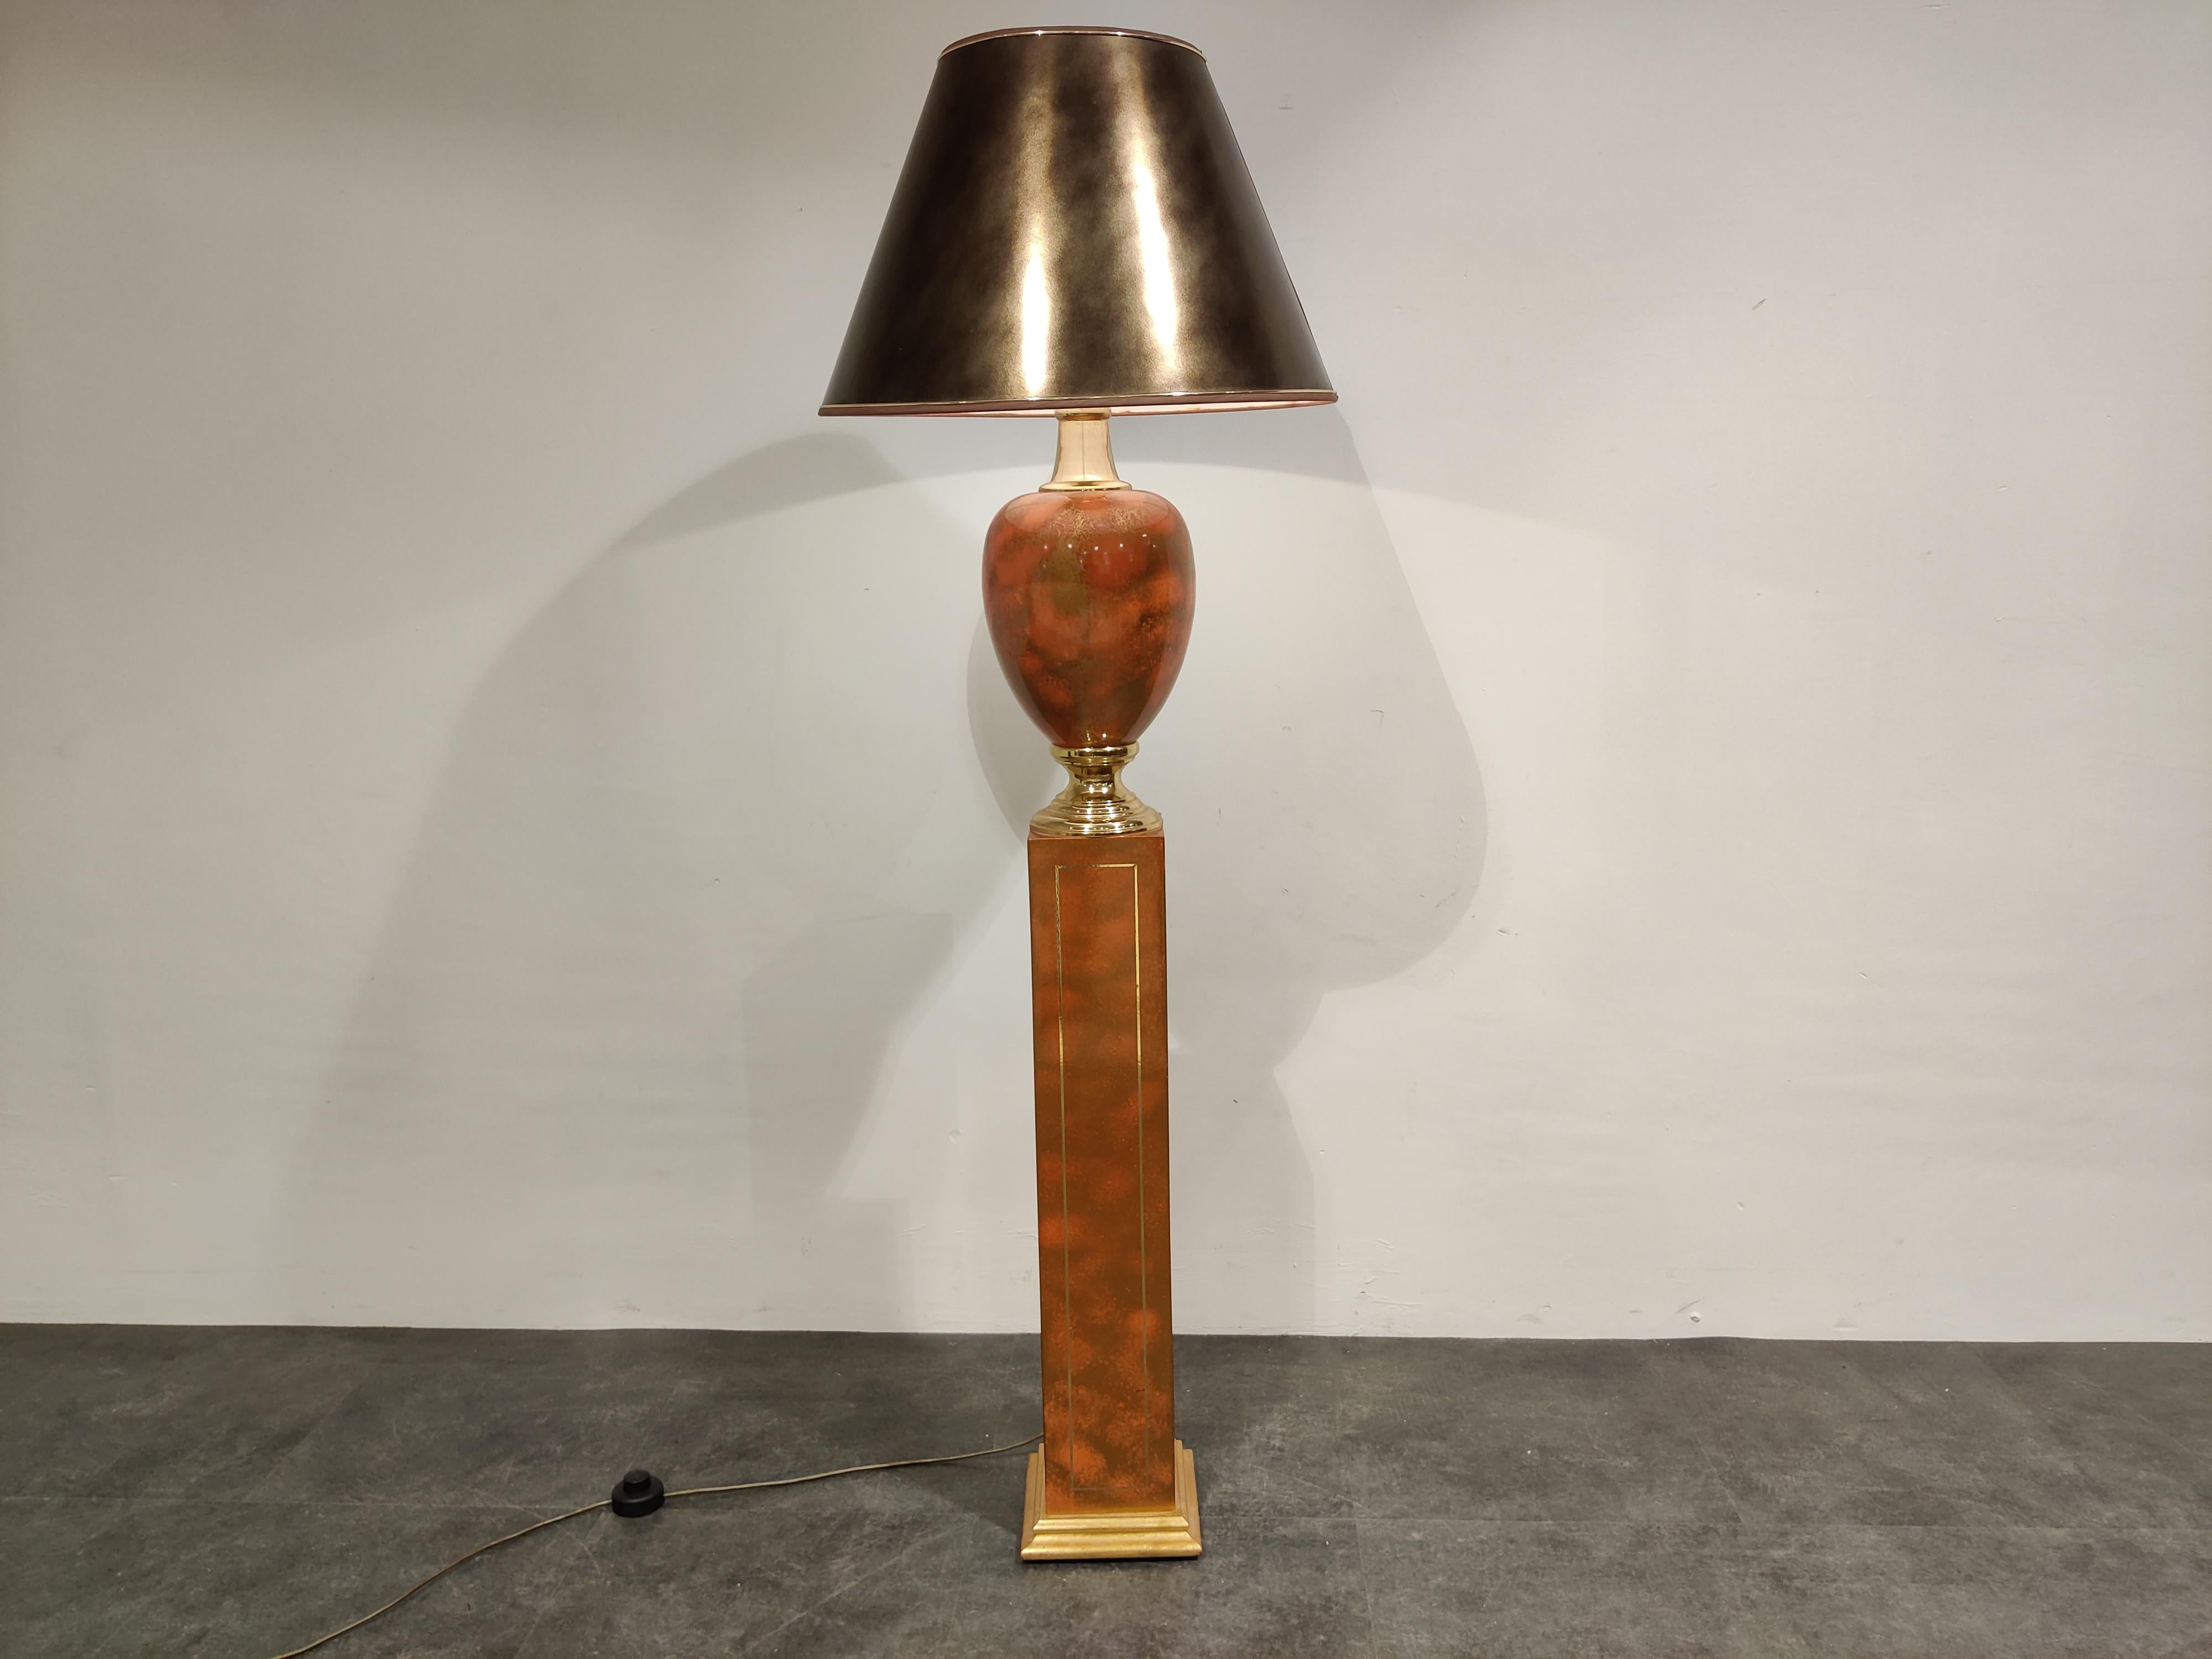 Elegant vase shaped floor lamp by Maison Le Dauphin.

This partially brass floor lamp has a great color, dark red or orange

Beautiful Hollywood regency lighting piece.

Comes with a period lamp shade which has a slight damage. 

1980s,